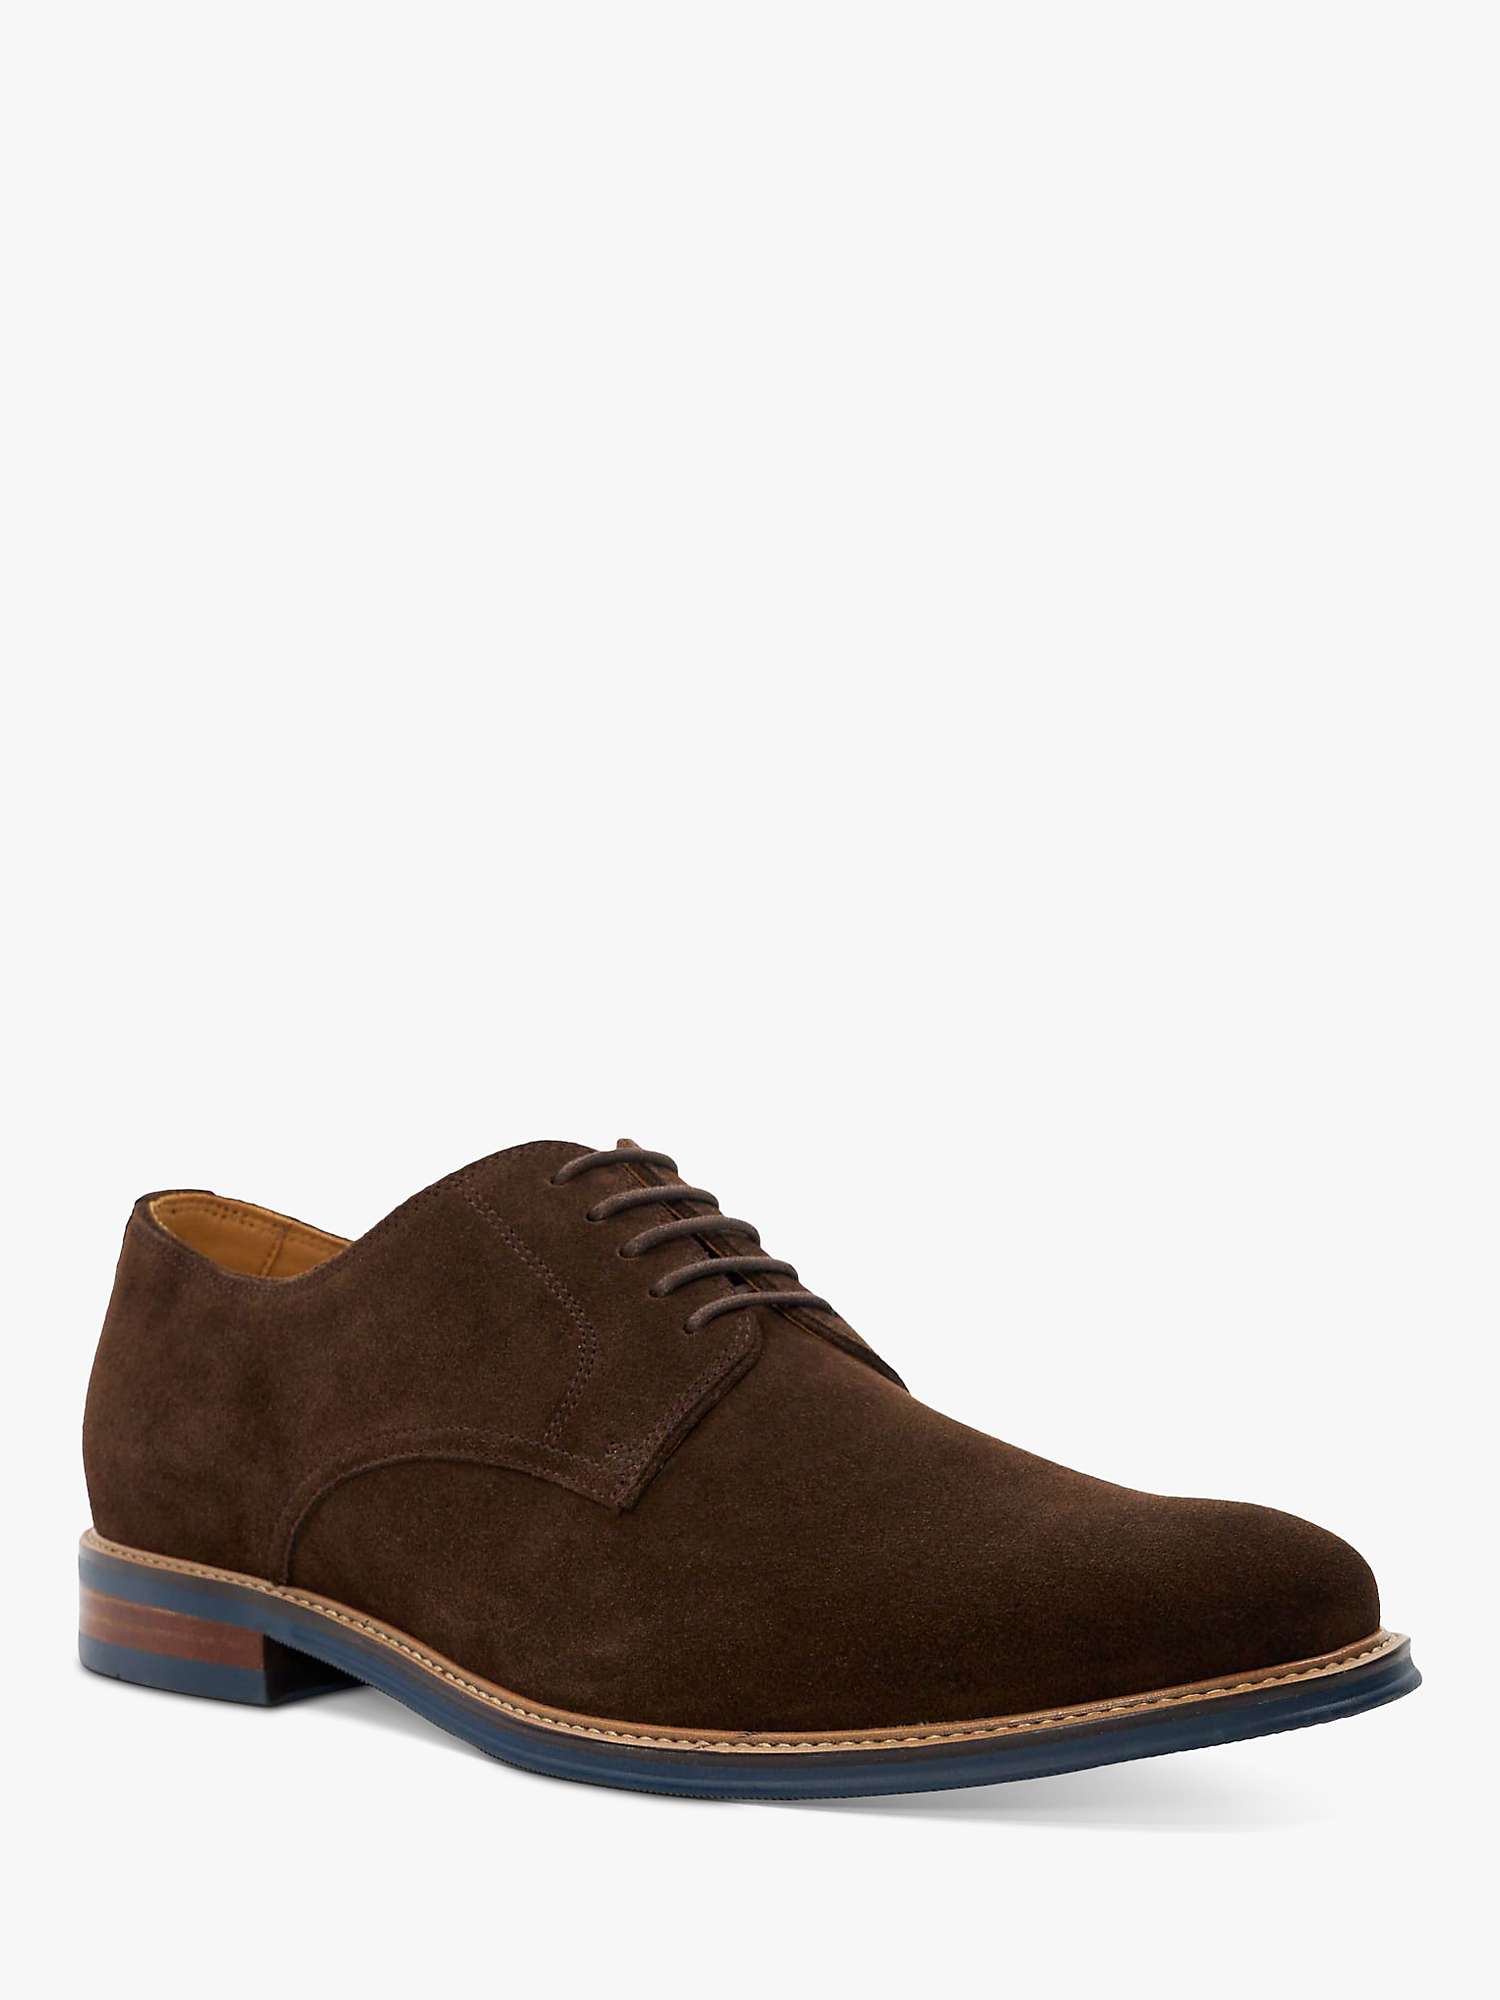 Buy Dune Stanleyyy Gibson Suede Shoes, Brown Online at johnlewis.com